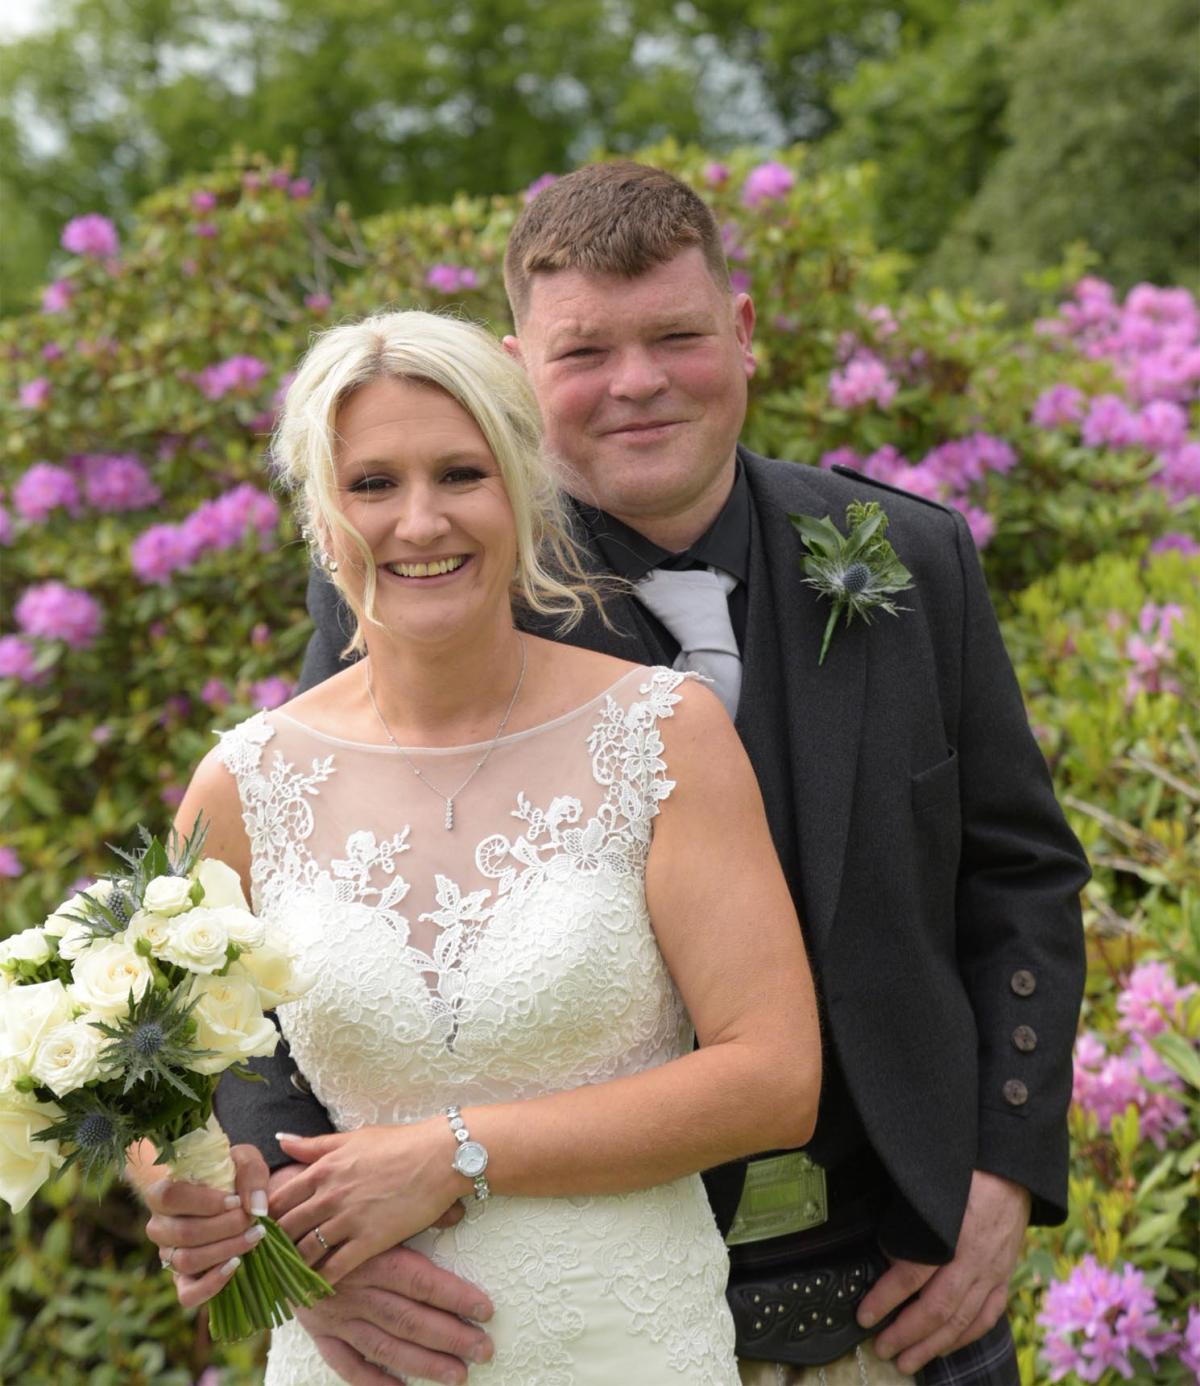 Yvonne Stewart and Stephen McCord, of Craigend Farm, Methven, Perthshire, were married at Dunblane Hydro. Photo: Strathearn Snapshots.